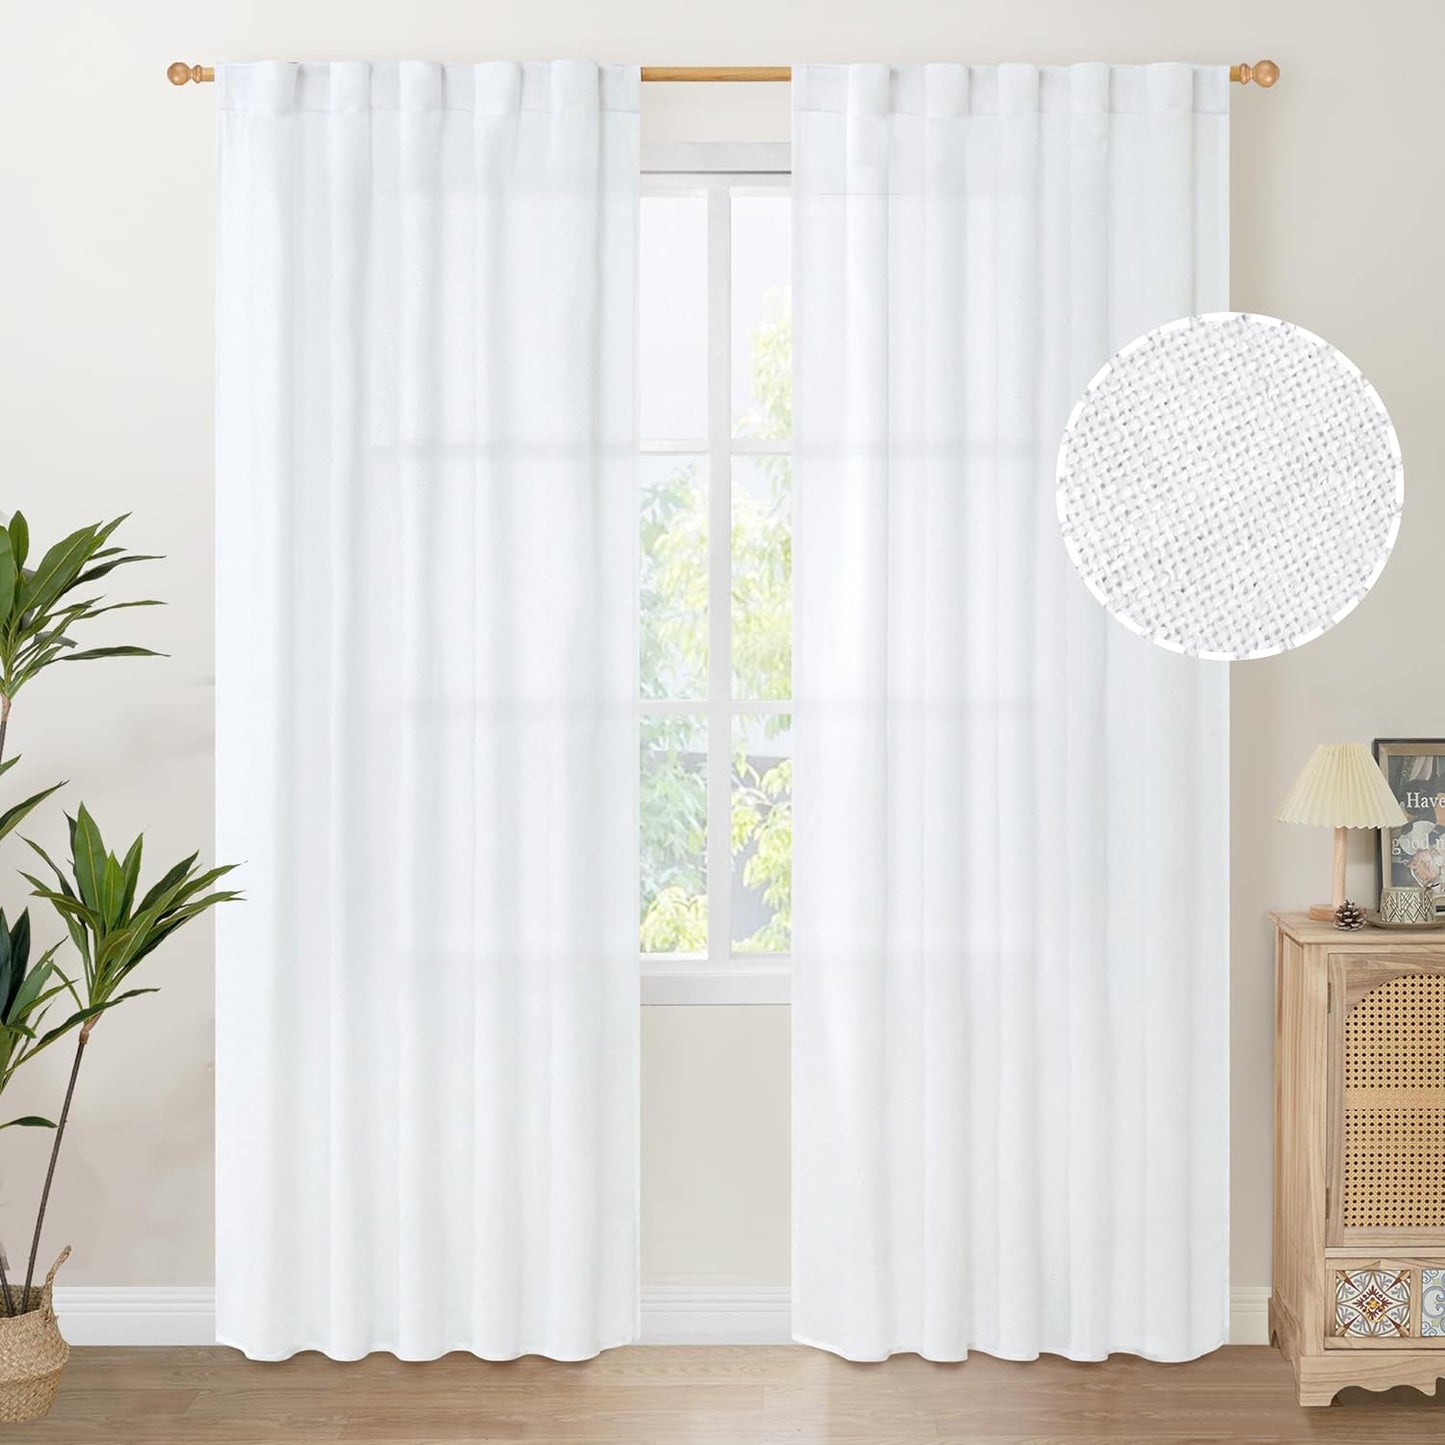 Youngstex Natural Linen Curtains 72 Inch Length 2 Panels for Living Room Light Filtering Textured Window Drapes for Bedroom Dining Office Back Tab Rod Pocket, 52 X 72 Inch  YoungsTex White 38W X 84L 